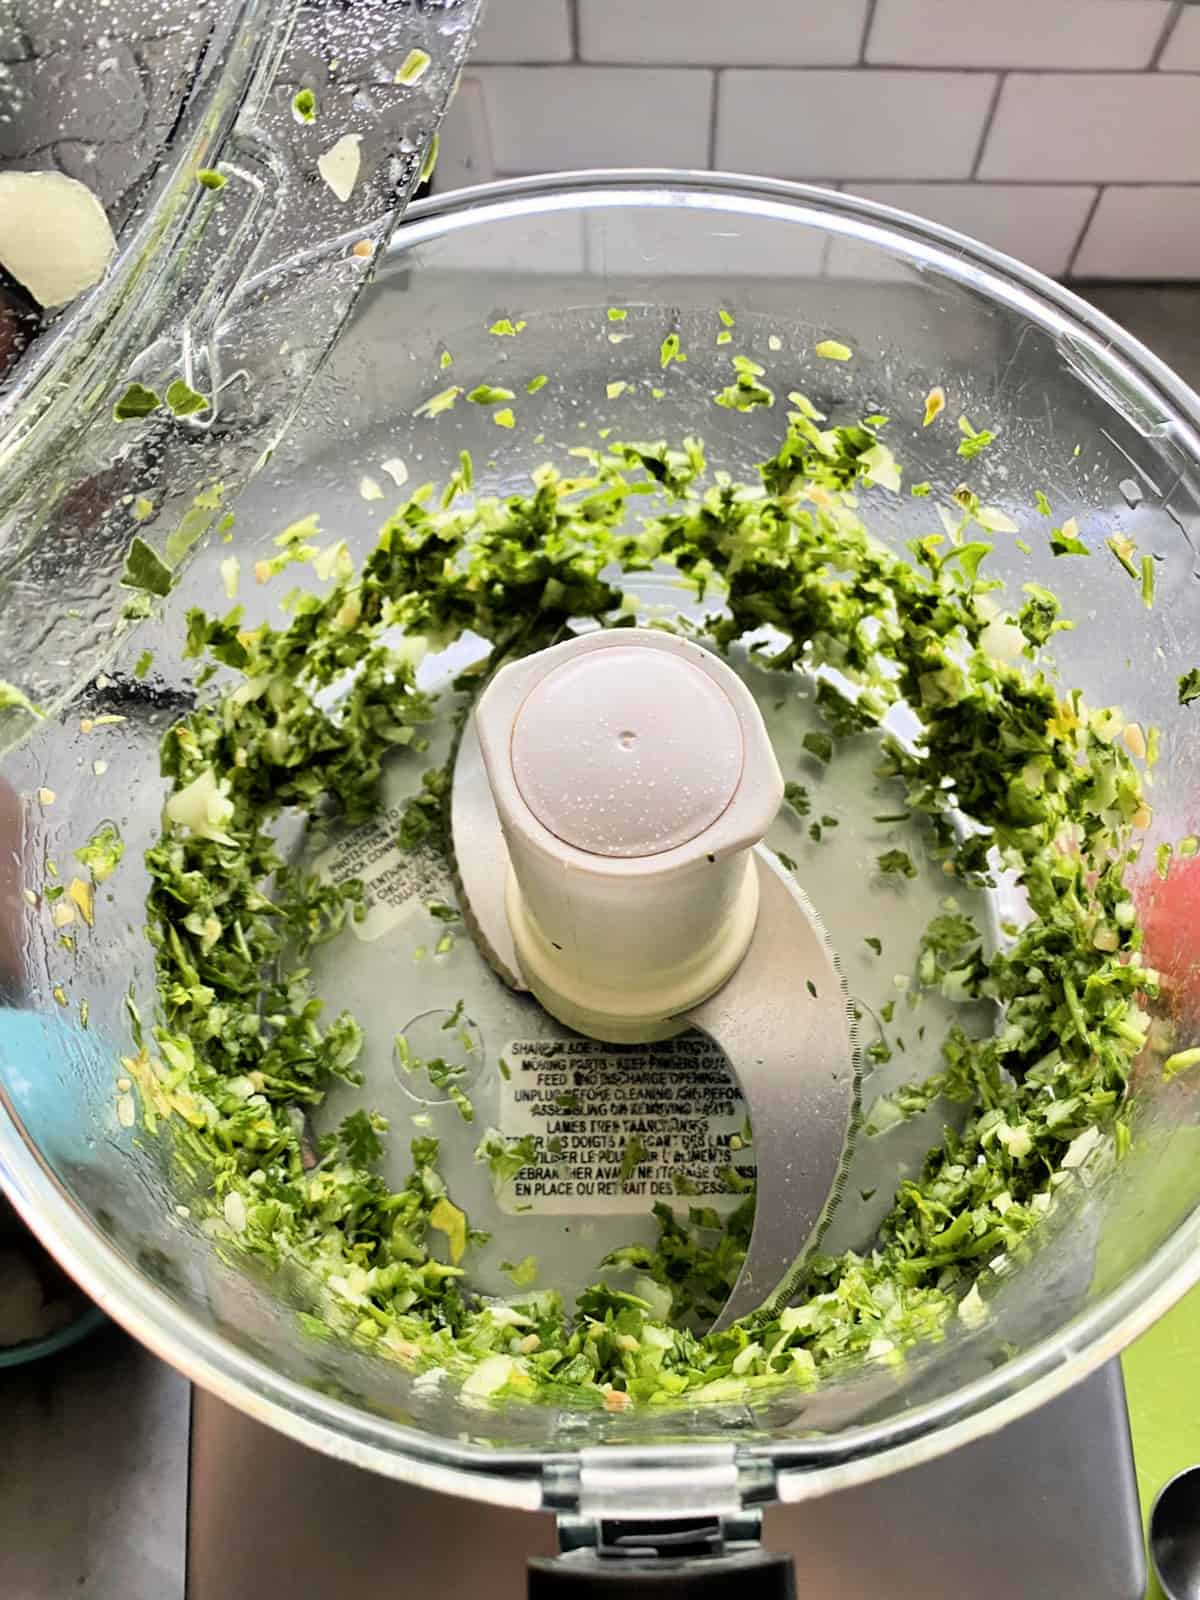 Food processor with blended cilantro and onion.